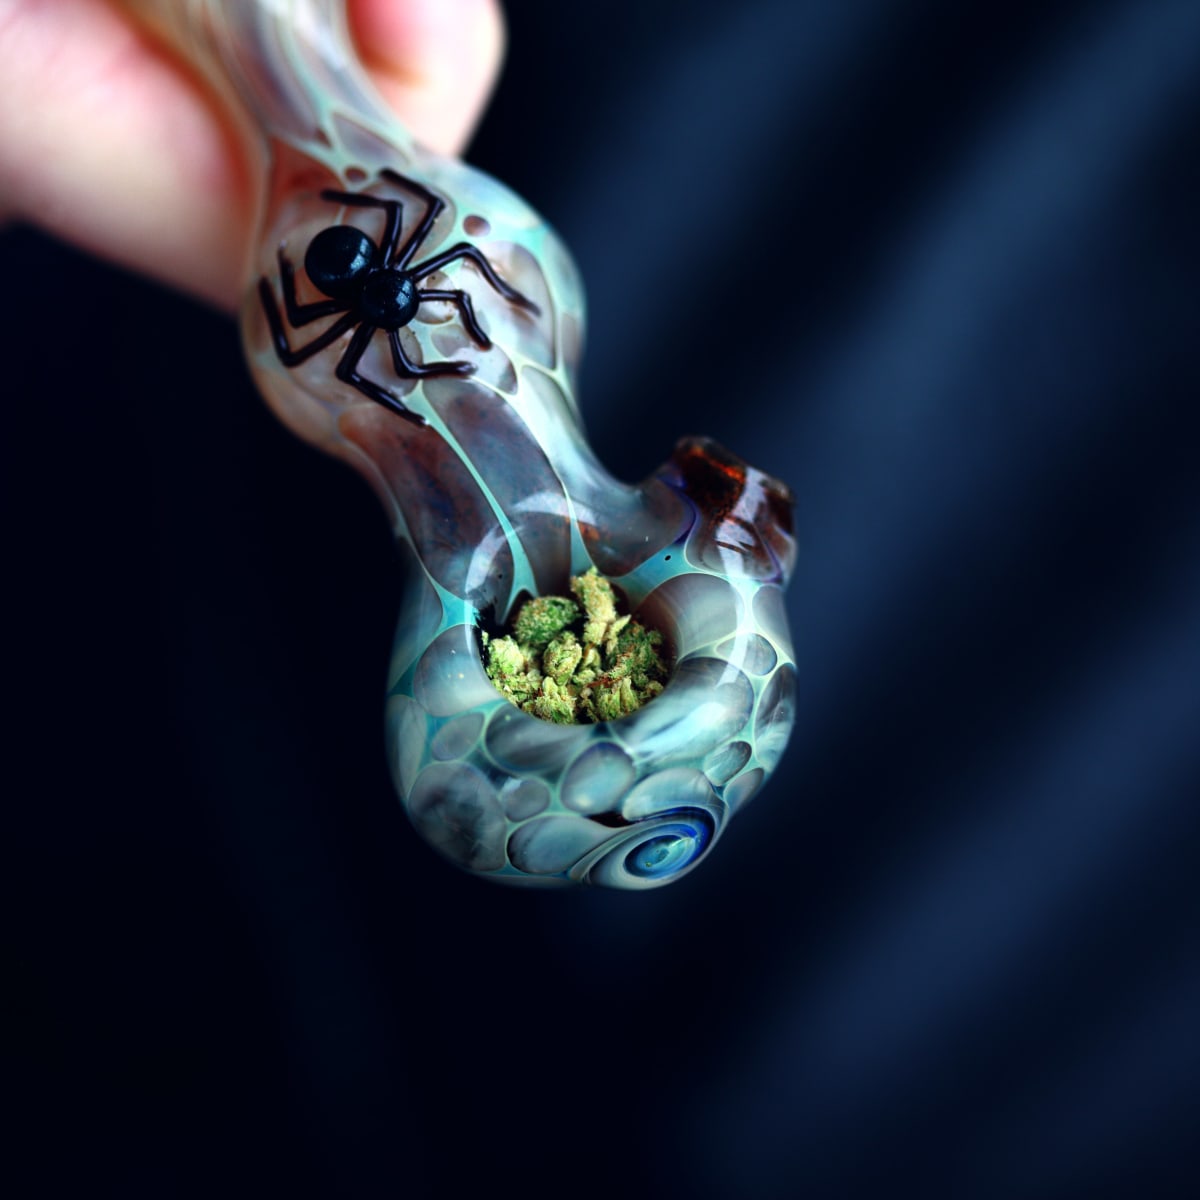 How hard should you pack a bowl?